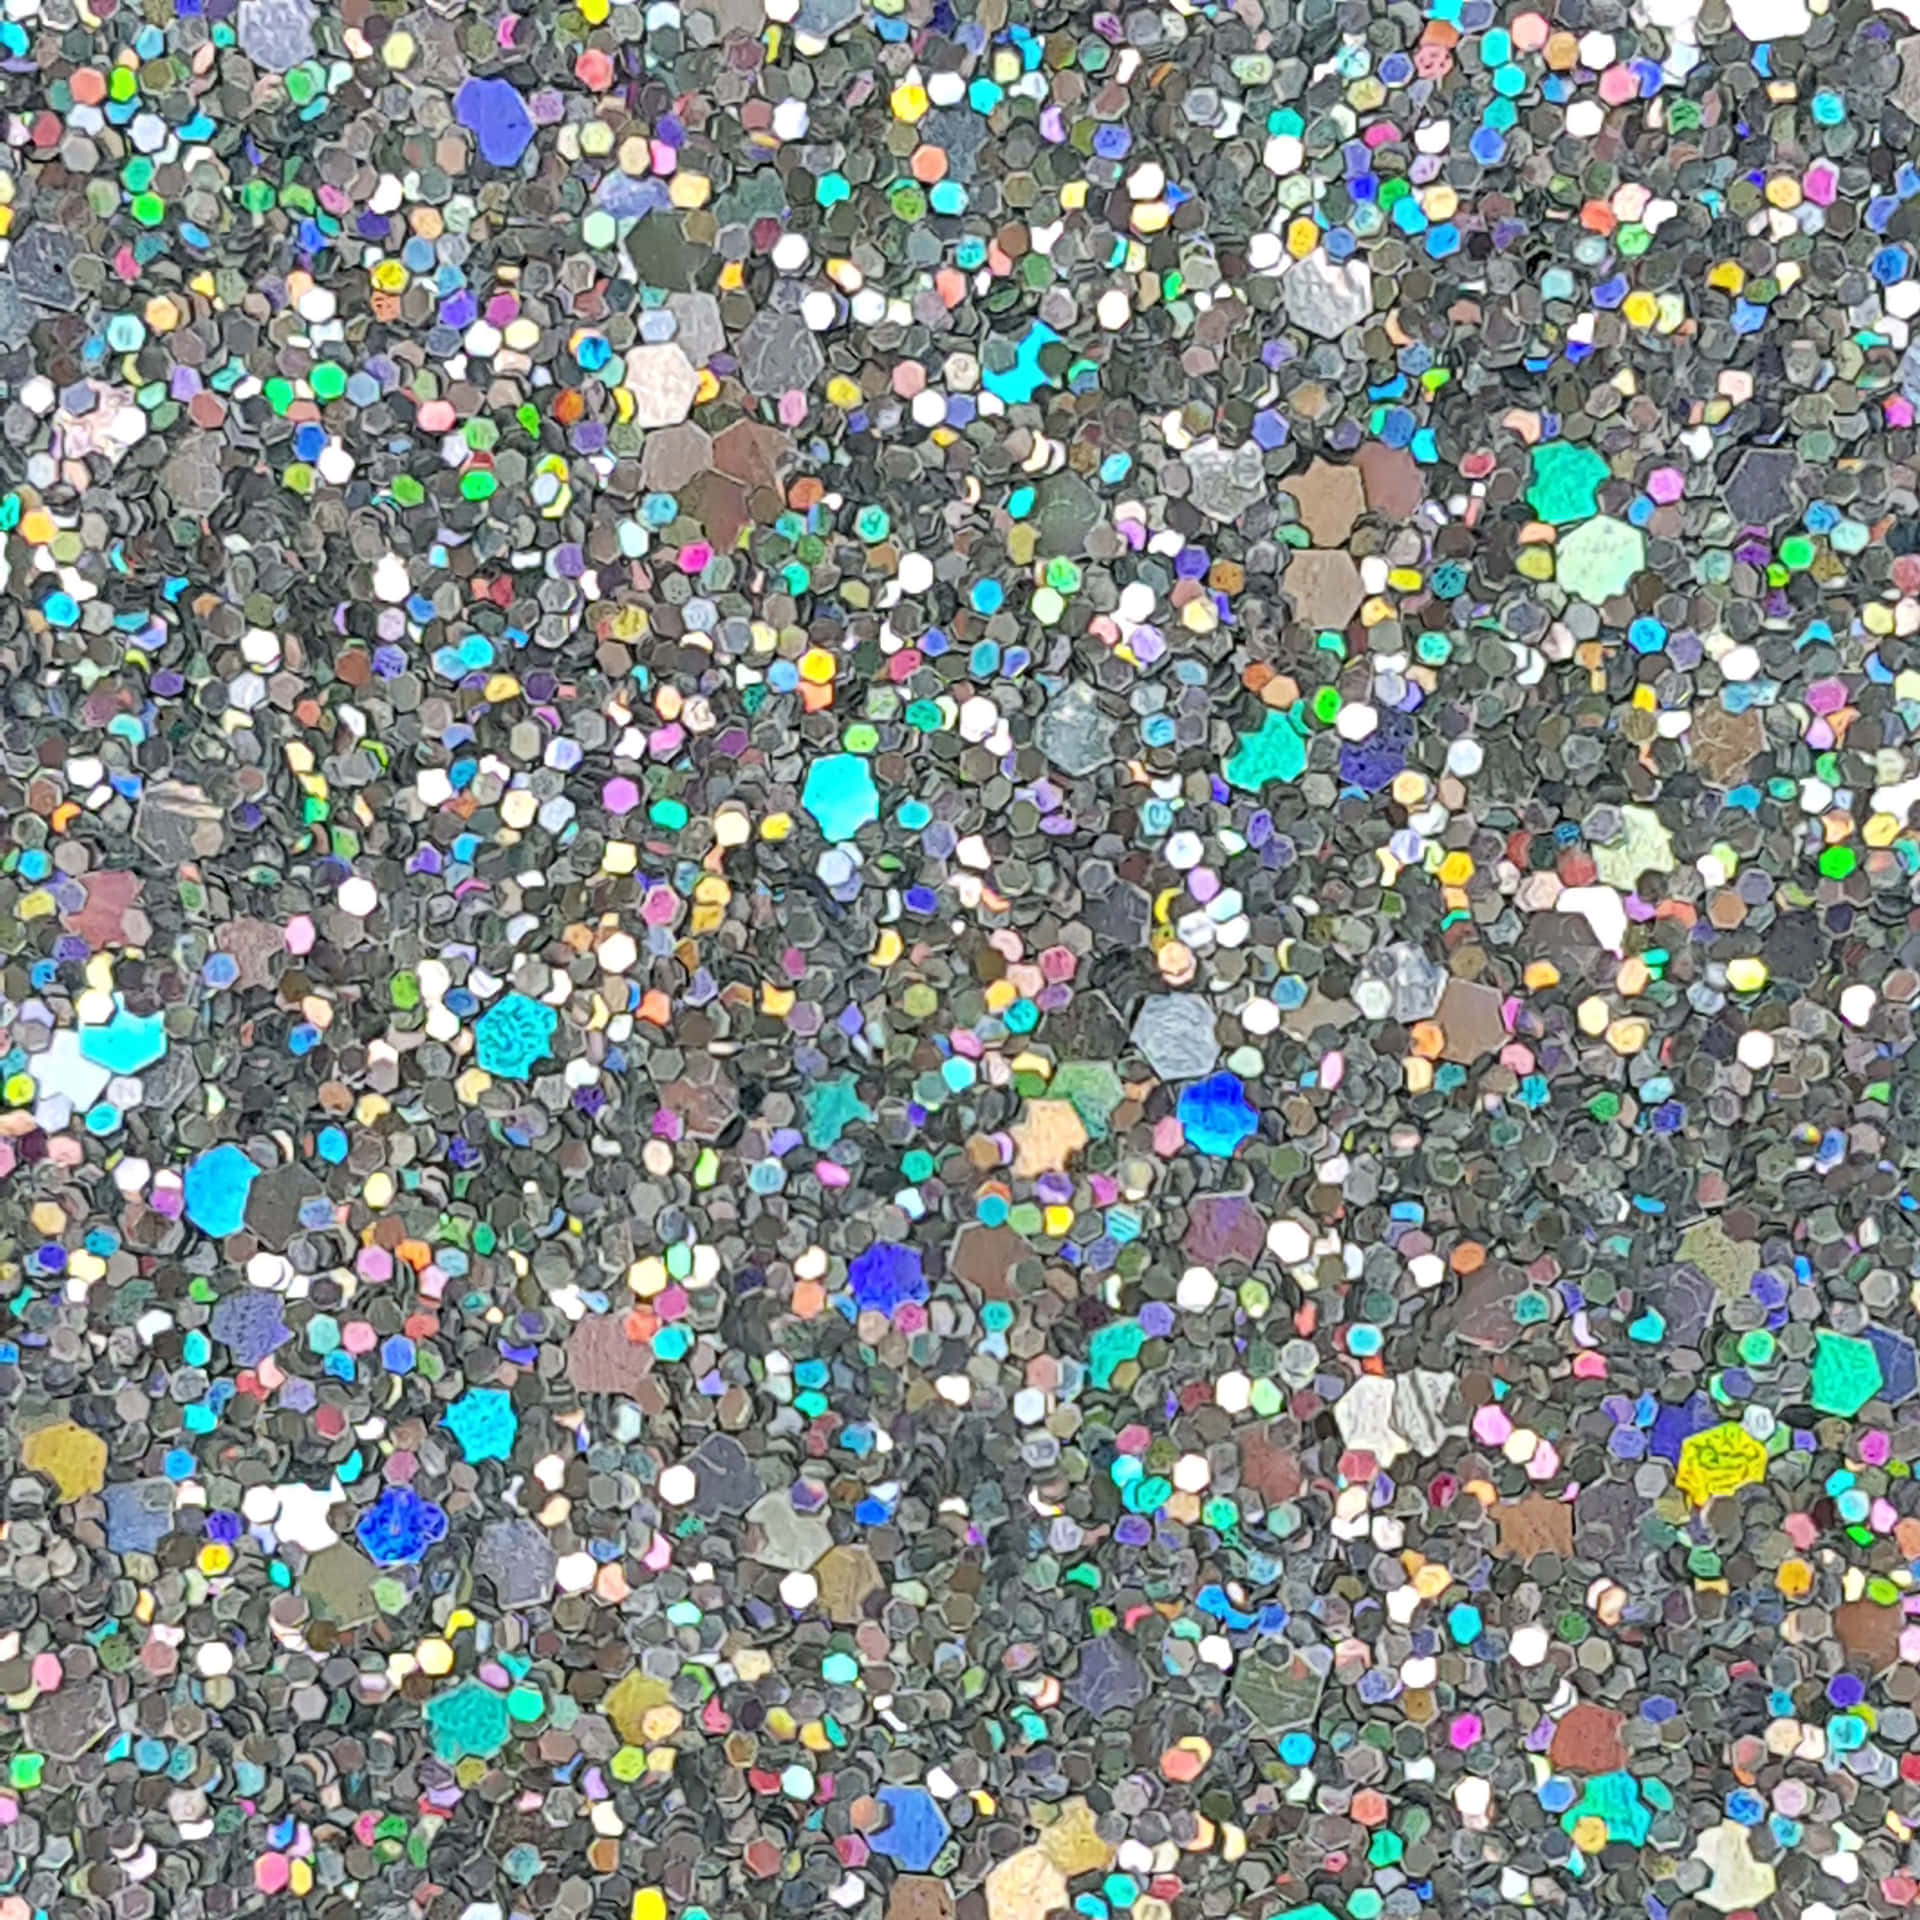 a close up of a colorful glittery surface